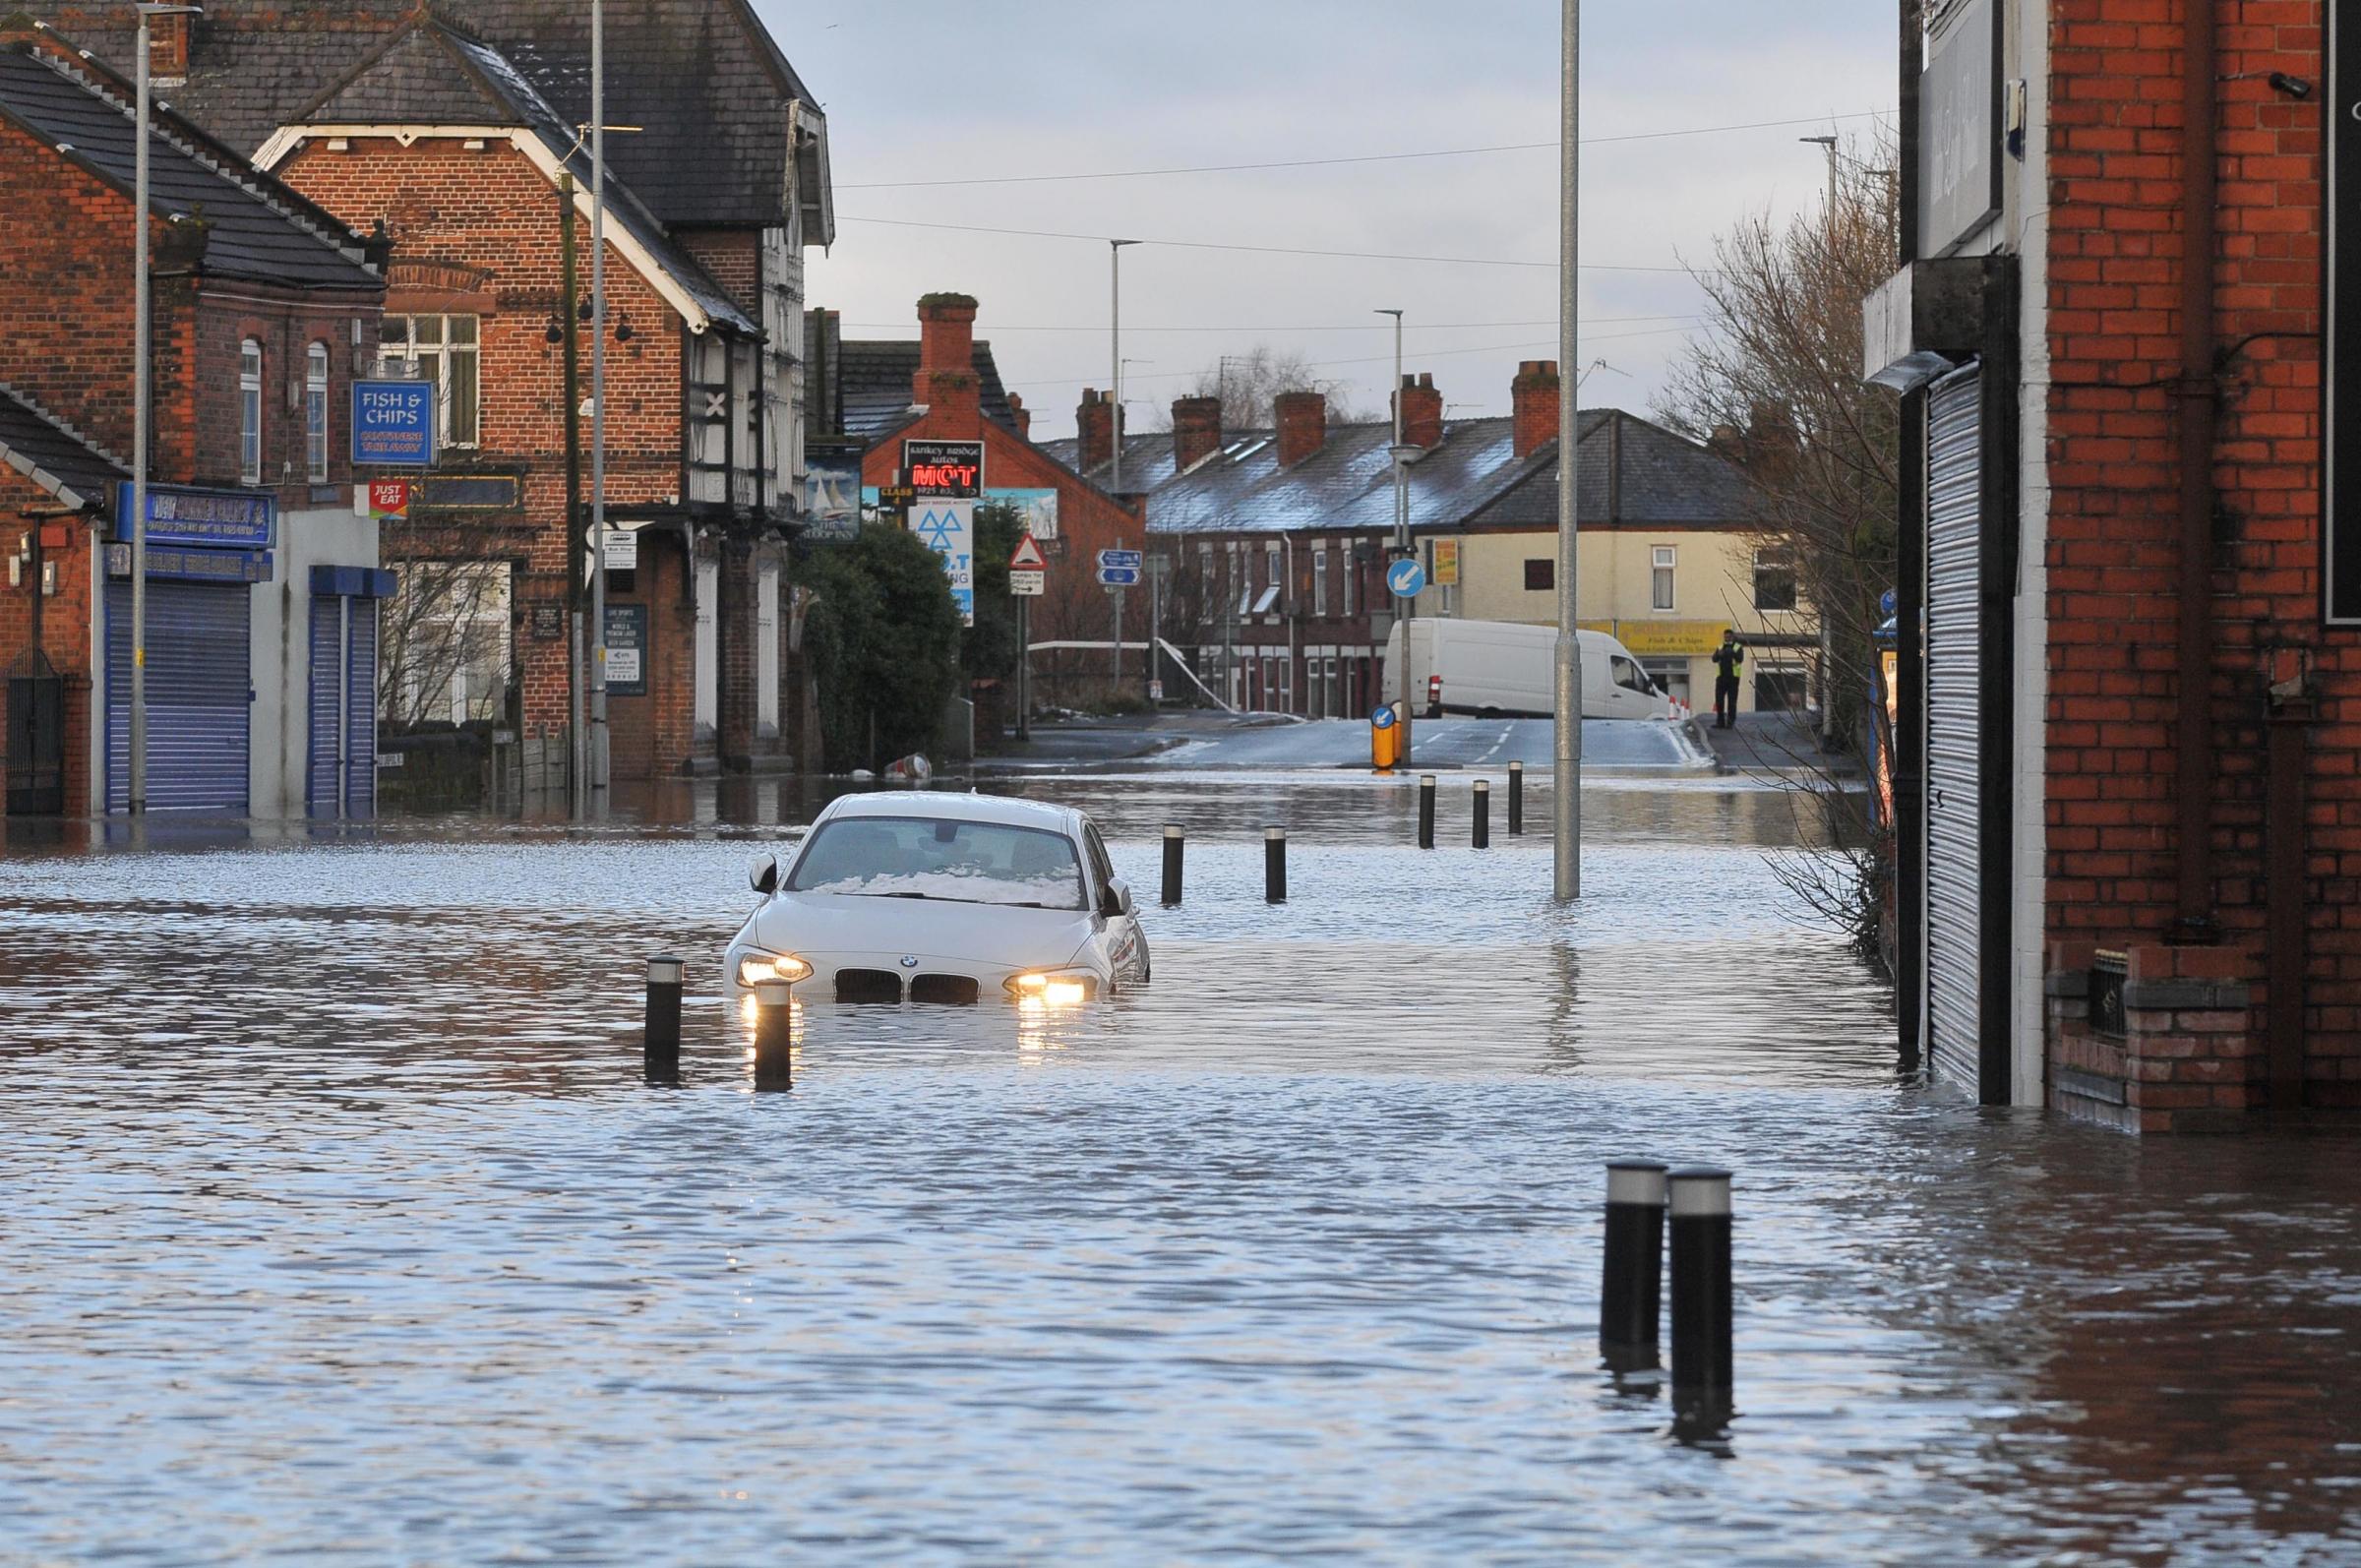 Warrington was hit with severe flooding in January this year (Image: Dave Gillespie)